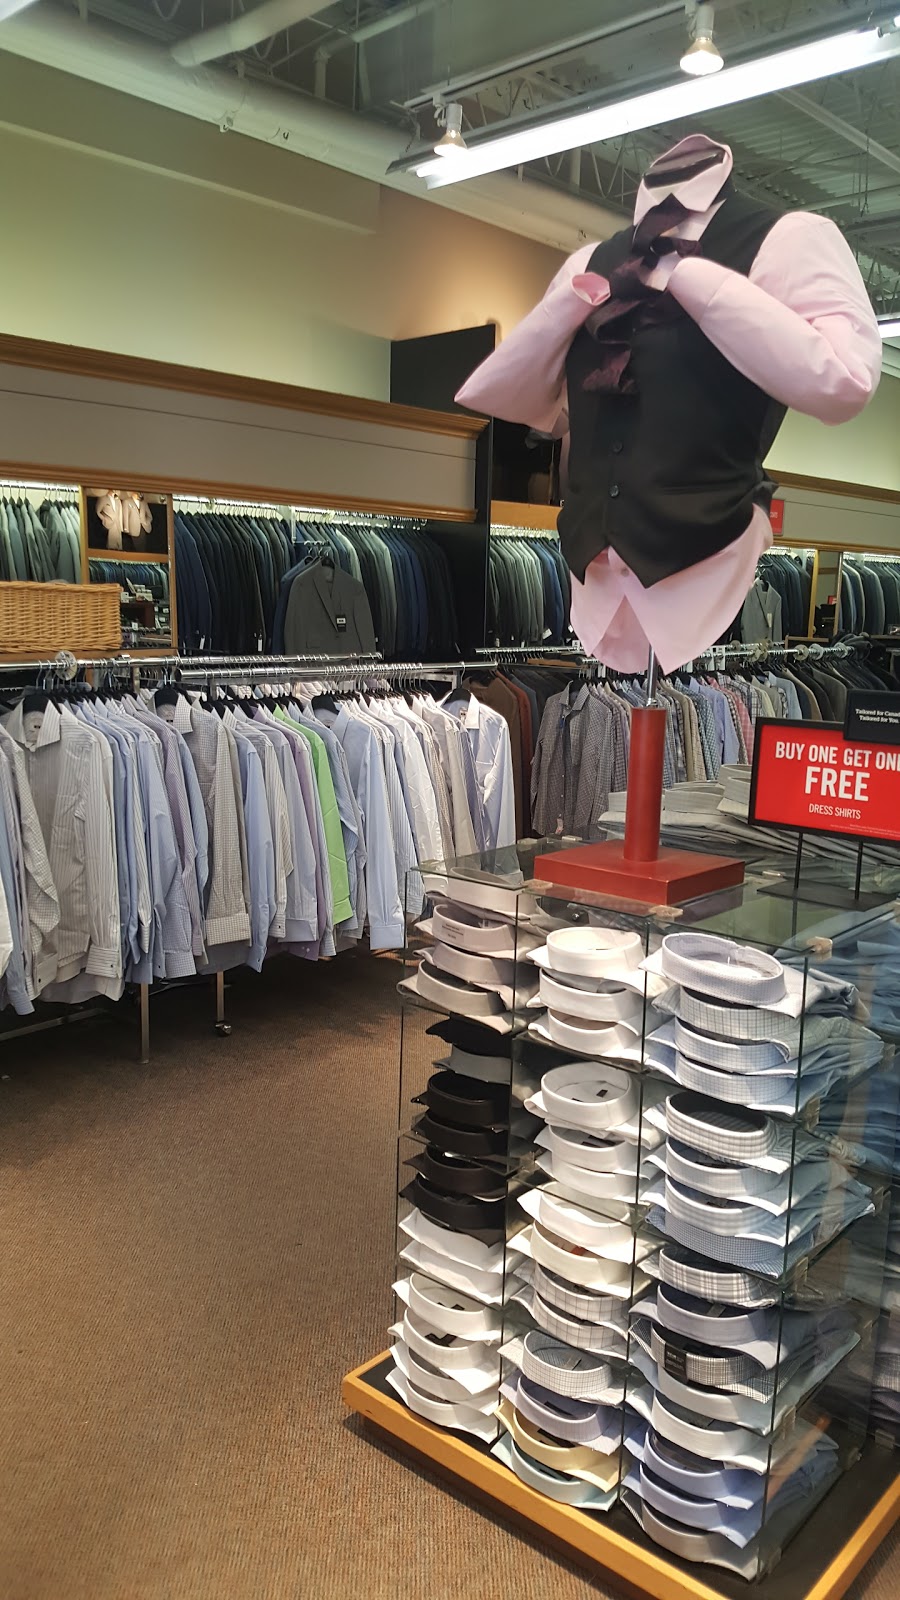 Moores Clothing for Men | clothing store | 12222 137 Ave NW, Edmonton, AB T5L 4X5, Canada | 7804566661 OR +1 780-456-6661